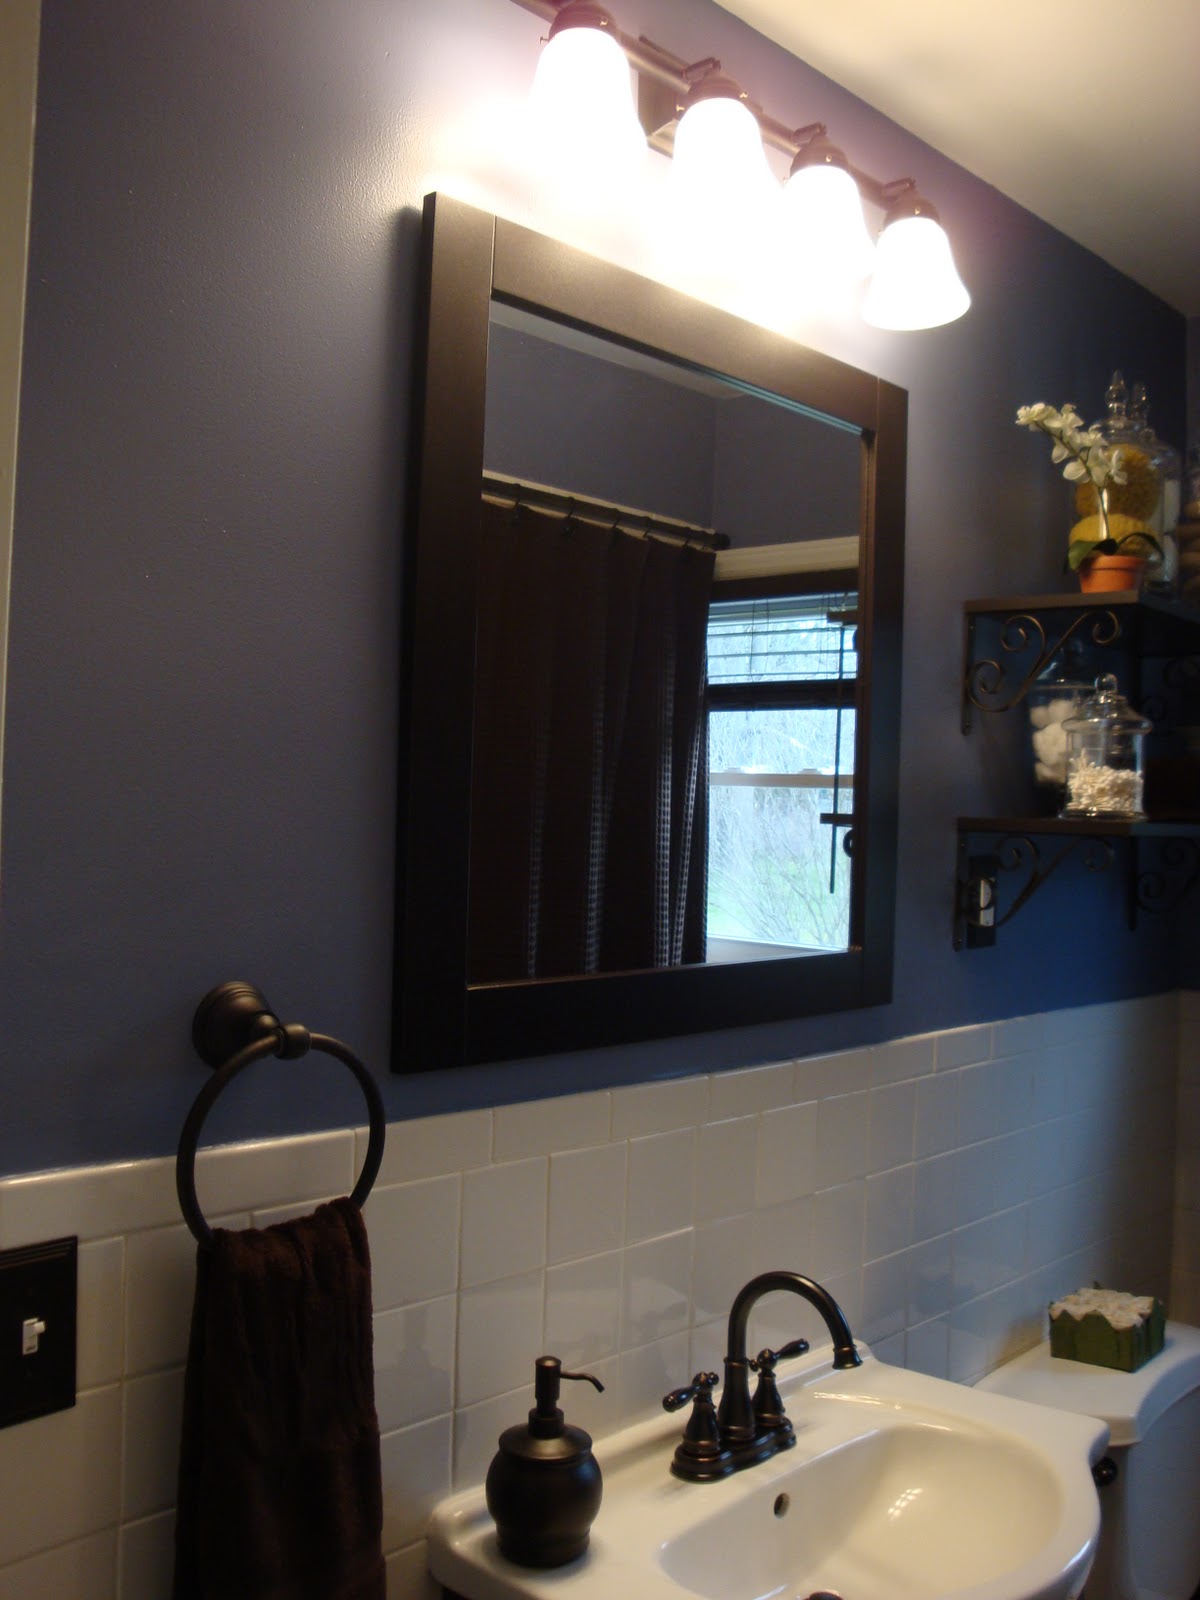 Lowes Bathrooms Remodel  Home Decoration Ideas